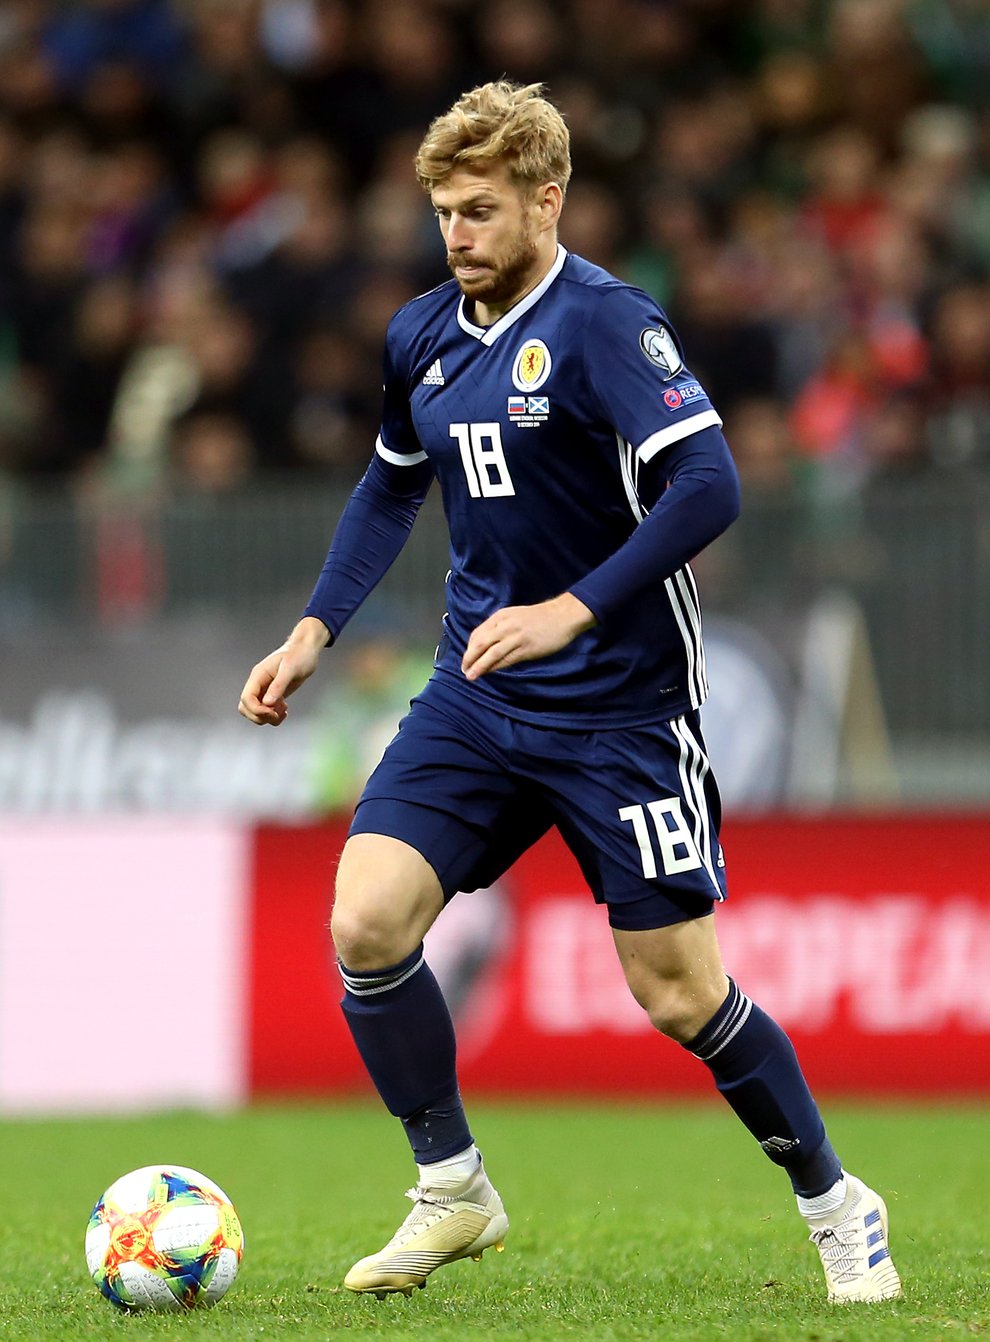 Stuart Armstrong came back injured from international duty